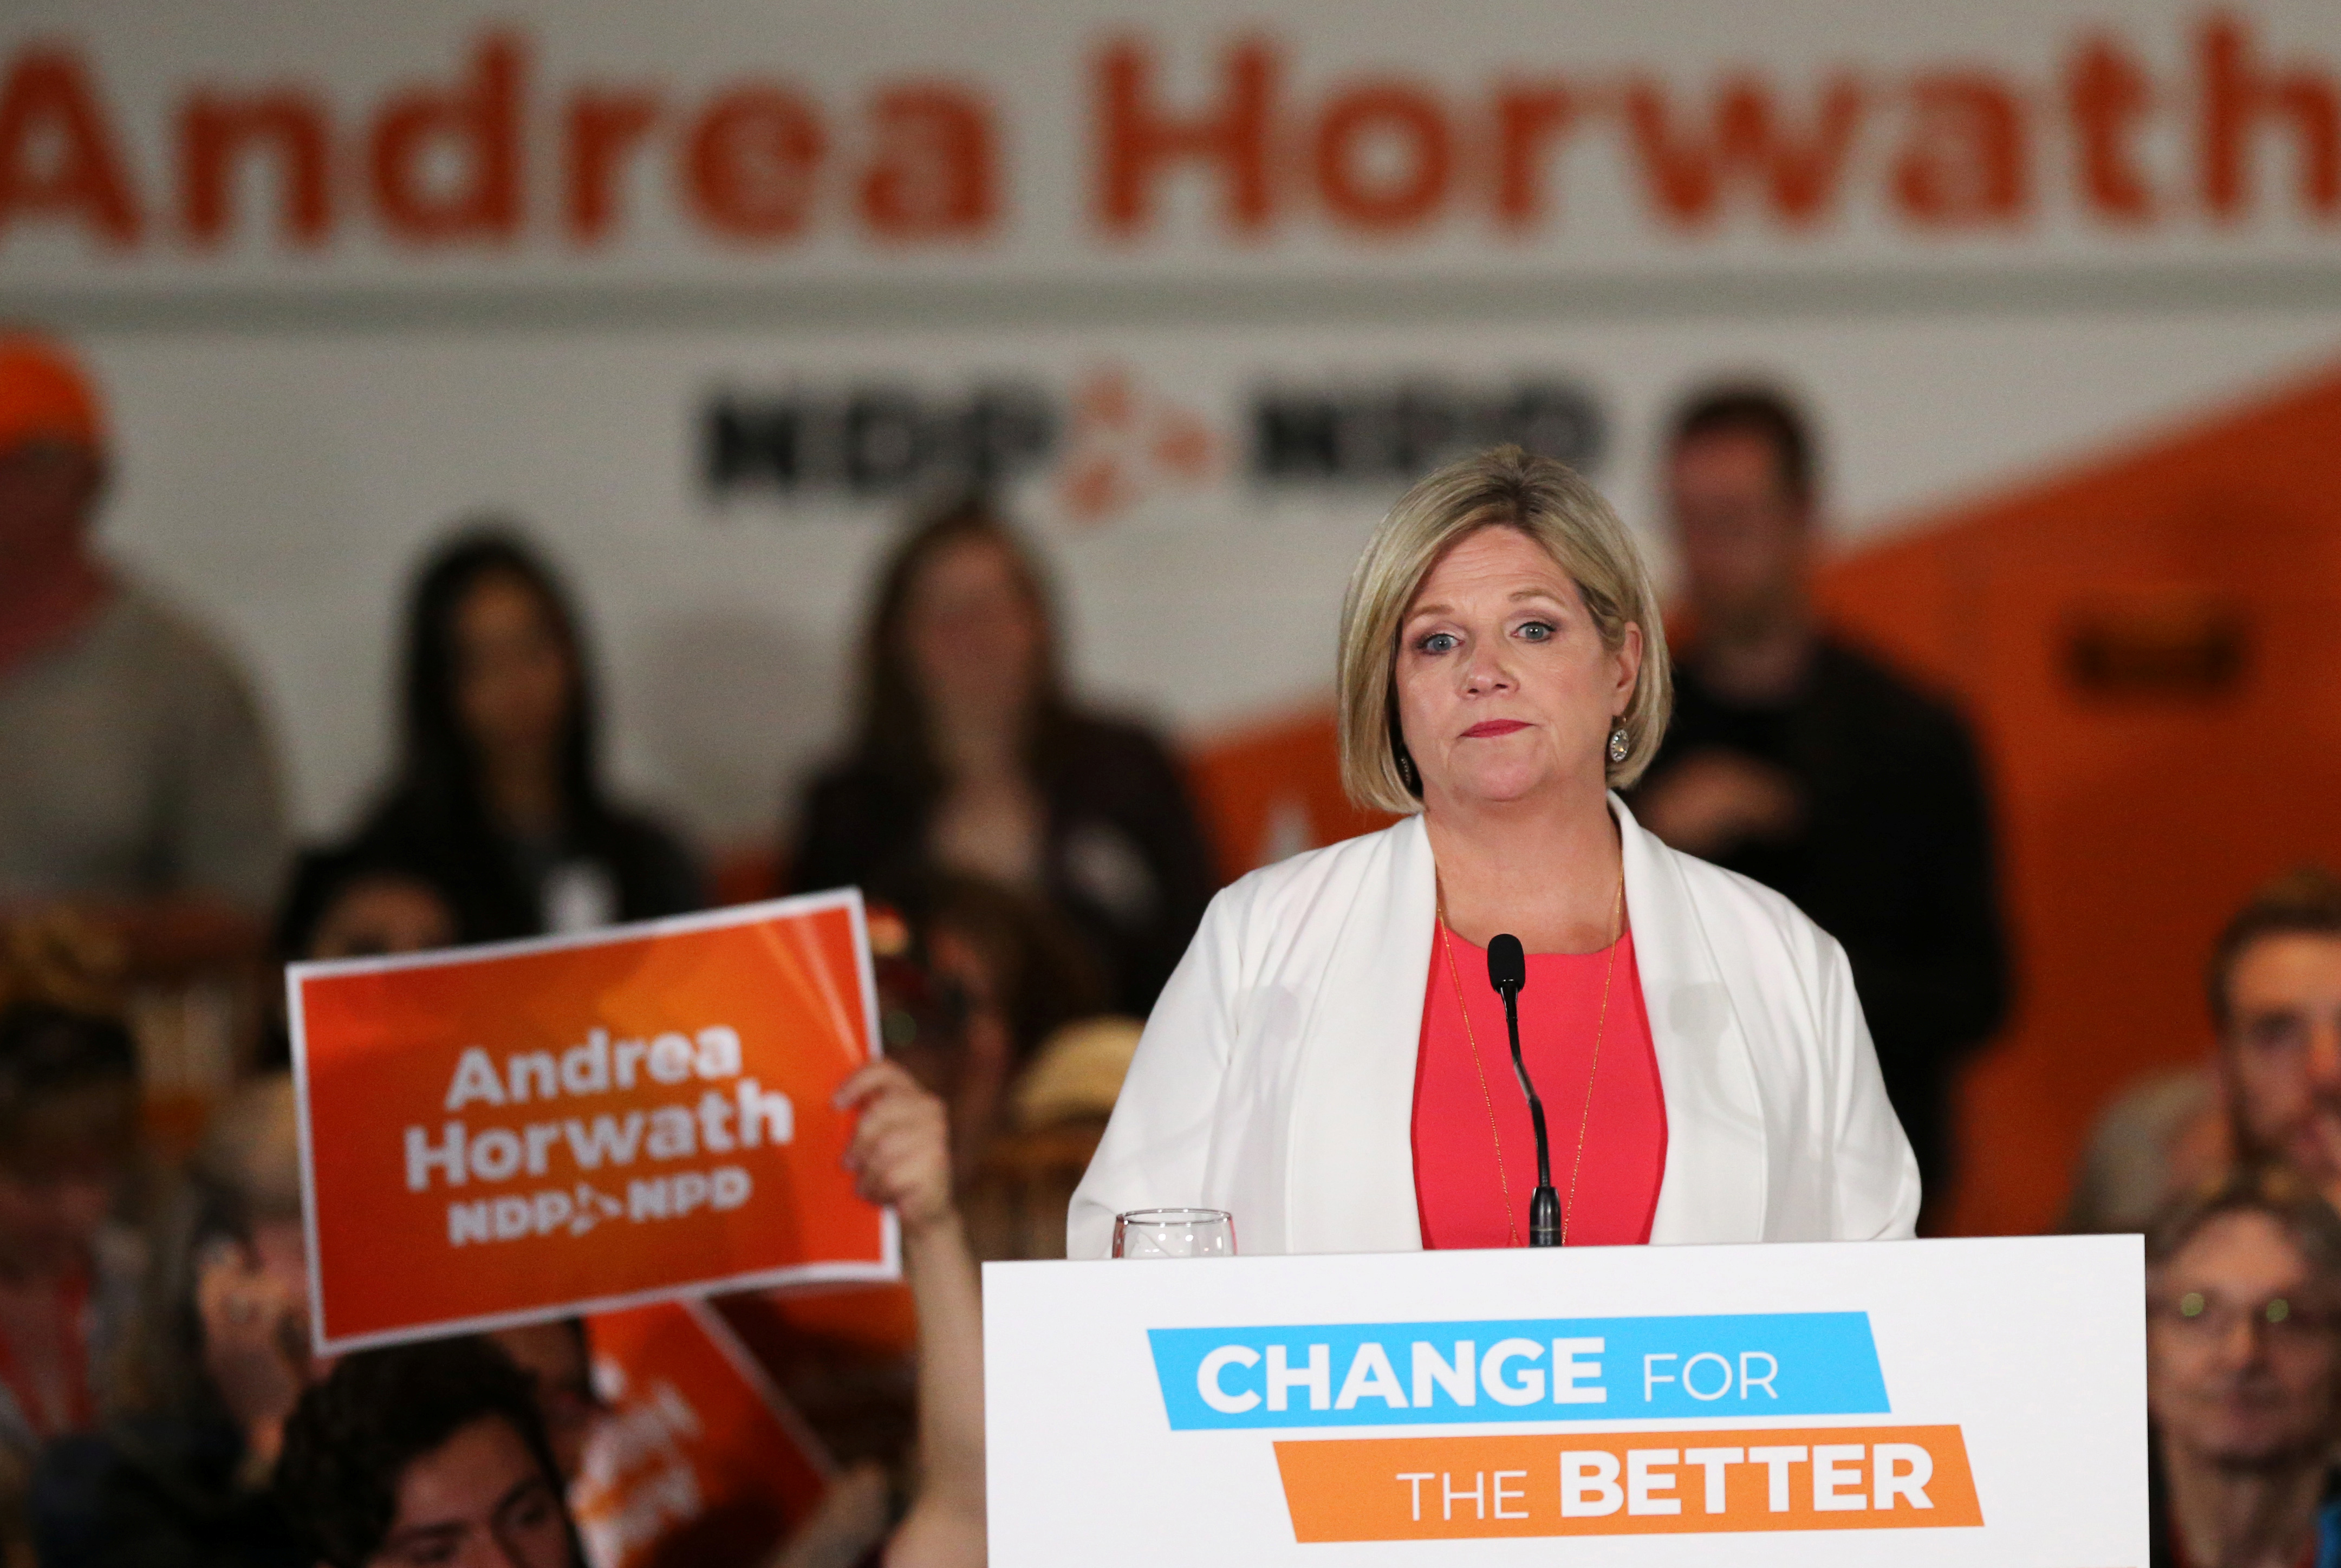 Andrea Horwath, leader of the Ontario New Democratic Party (NDP), speaks after provincial election voting closed, in Hamilton